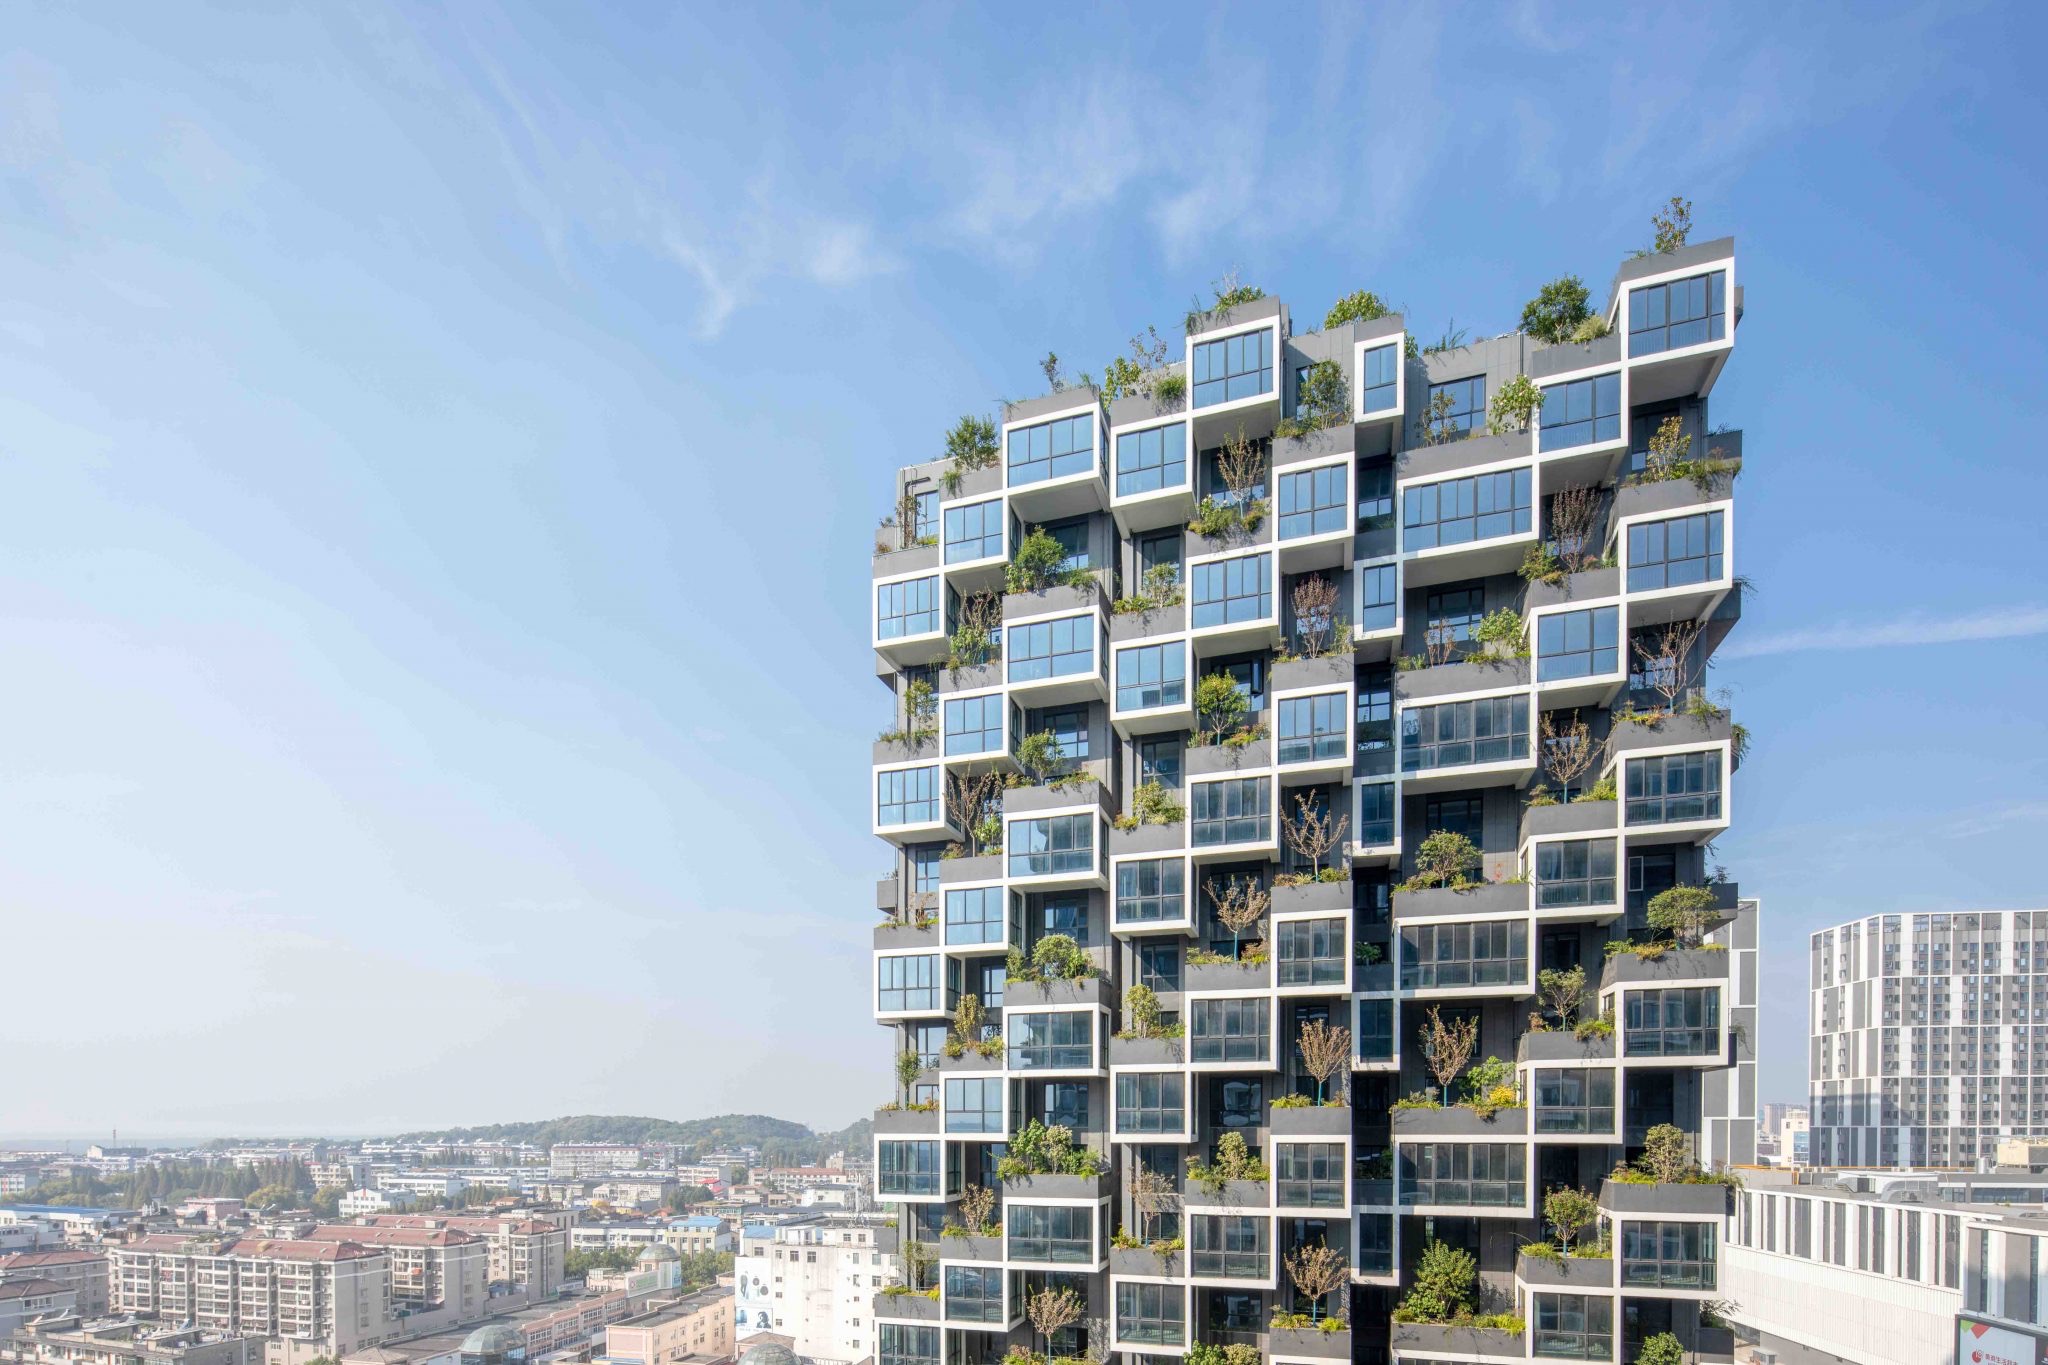 The irregular arrangement of the balconies allows the plants to develop freely in height and the foliage to fit perfectly into the façade design.